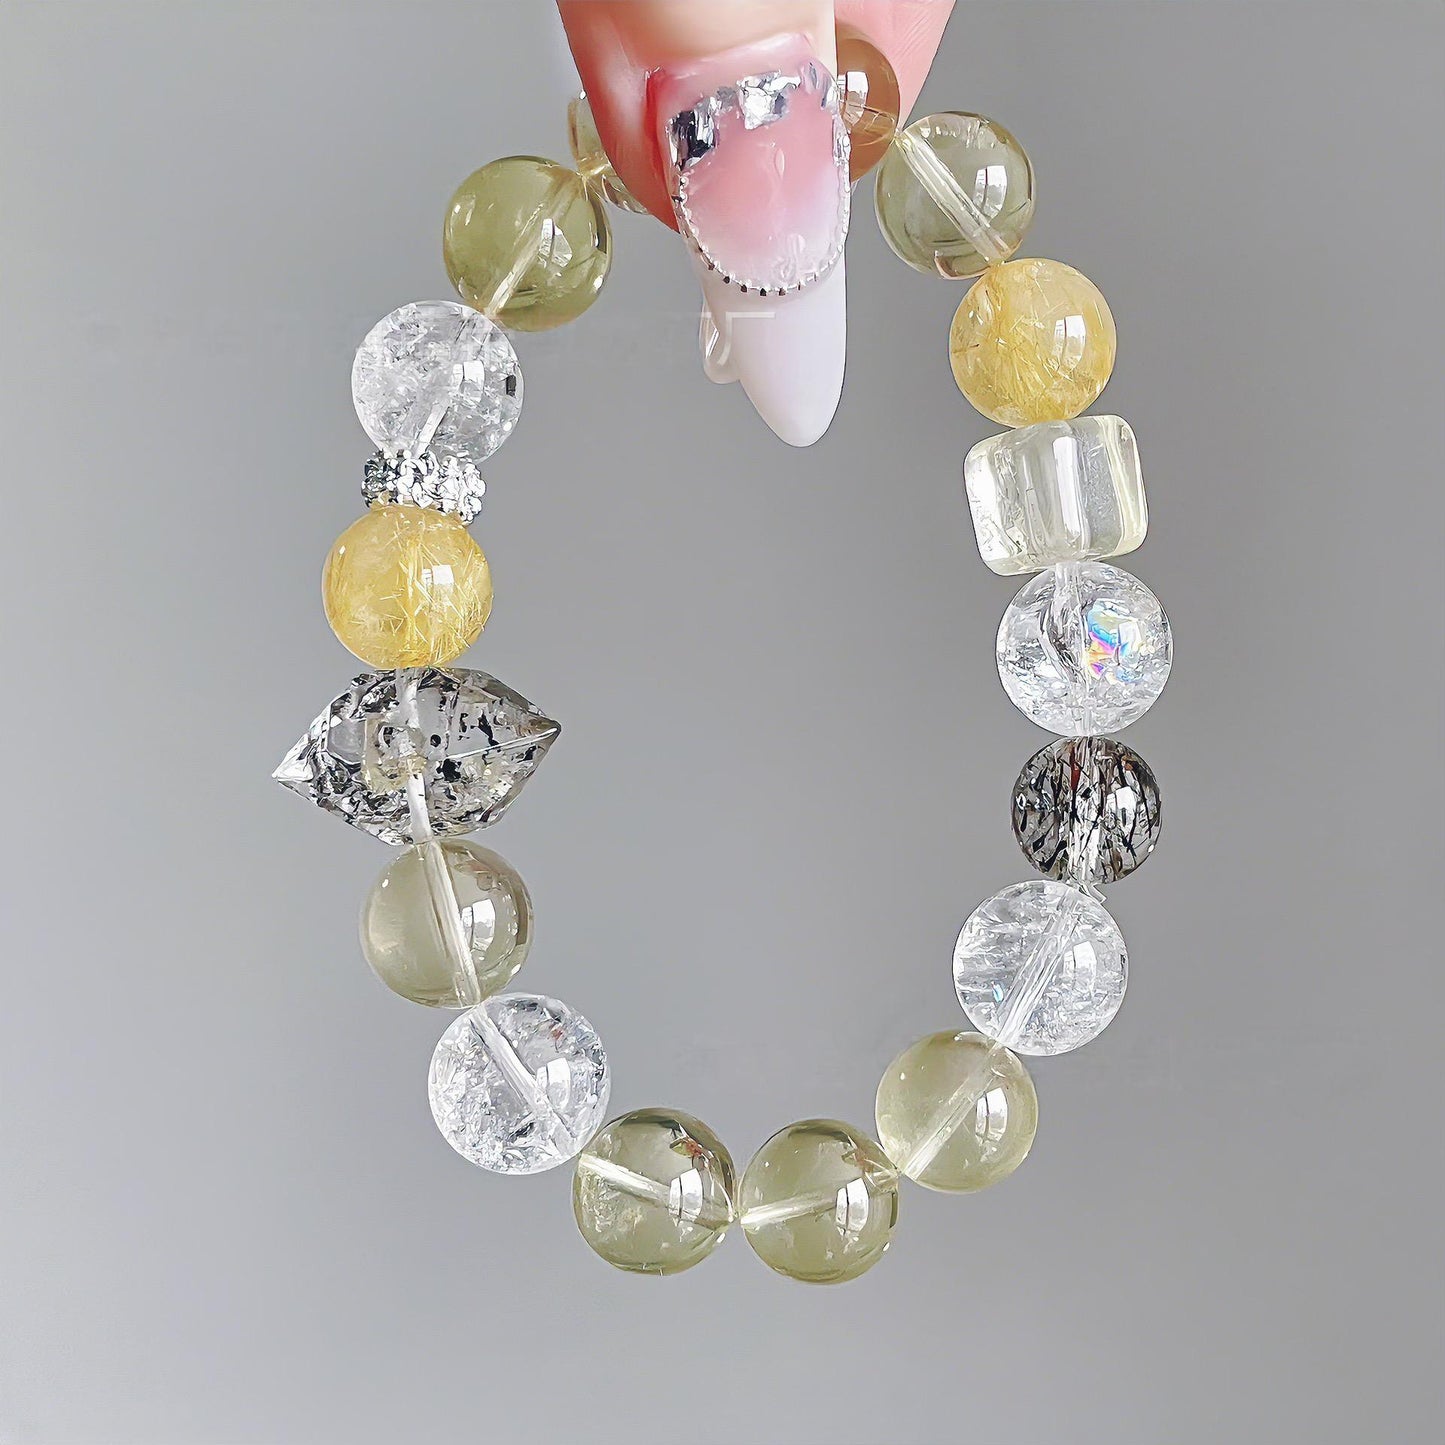 August.May your dreams come true.Advanced handmade custom natural crystal bracelet